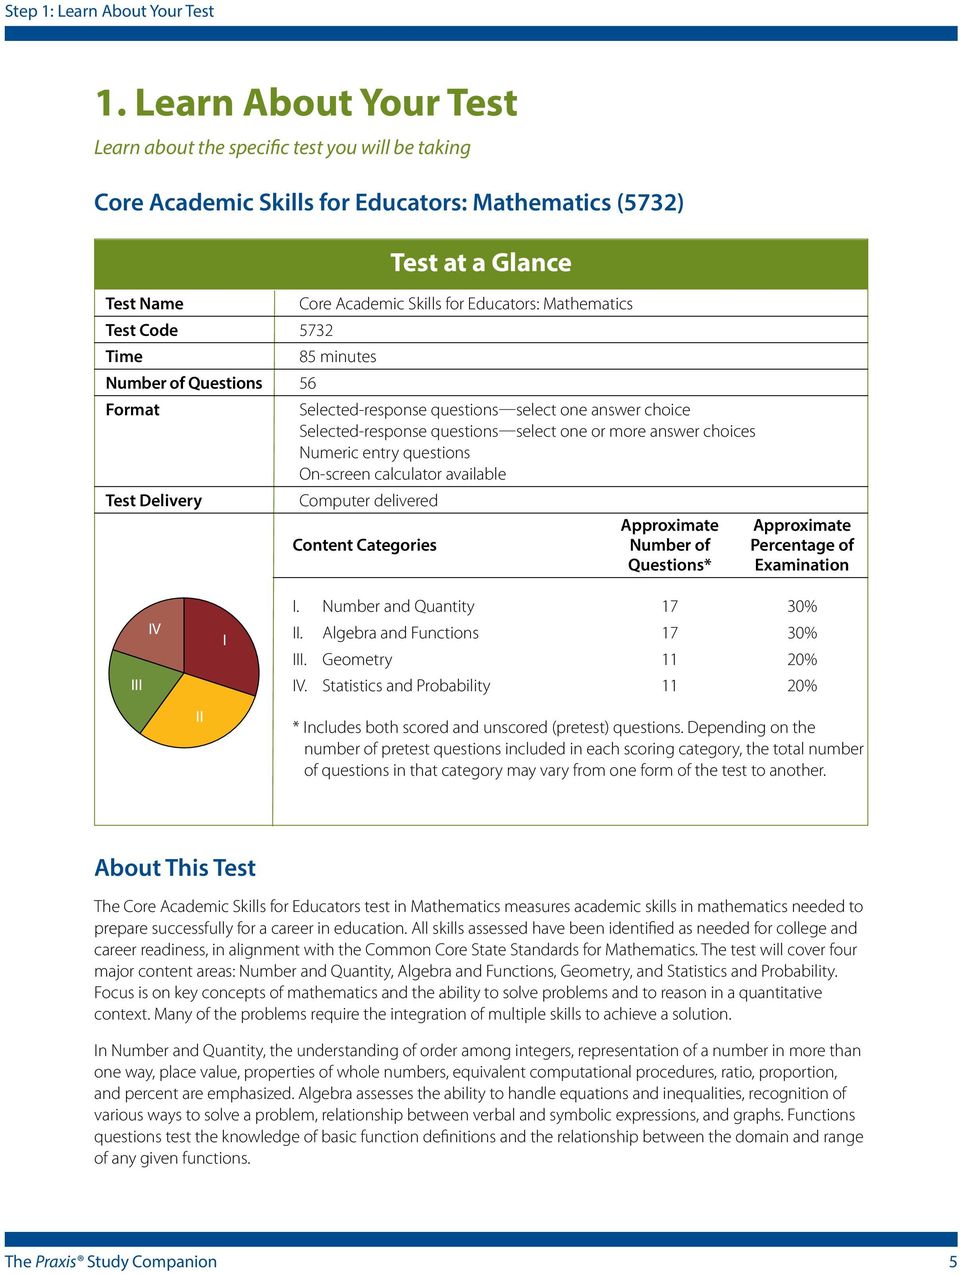 Test at a Glance Core Academic Skills for Educators: Mathematics 85 minutes Selected-response questions select one answer choice Selected-response questions select one or more answer choices Numeric